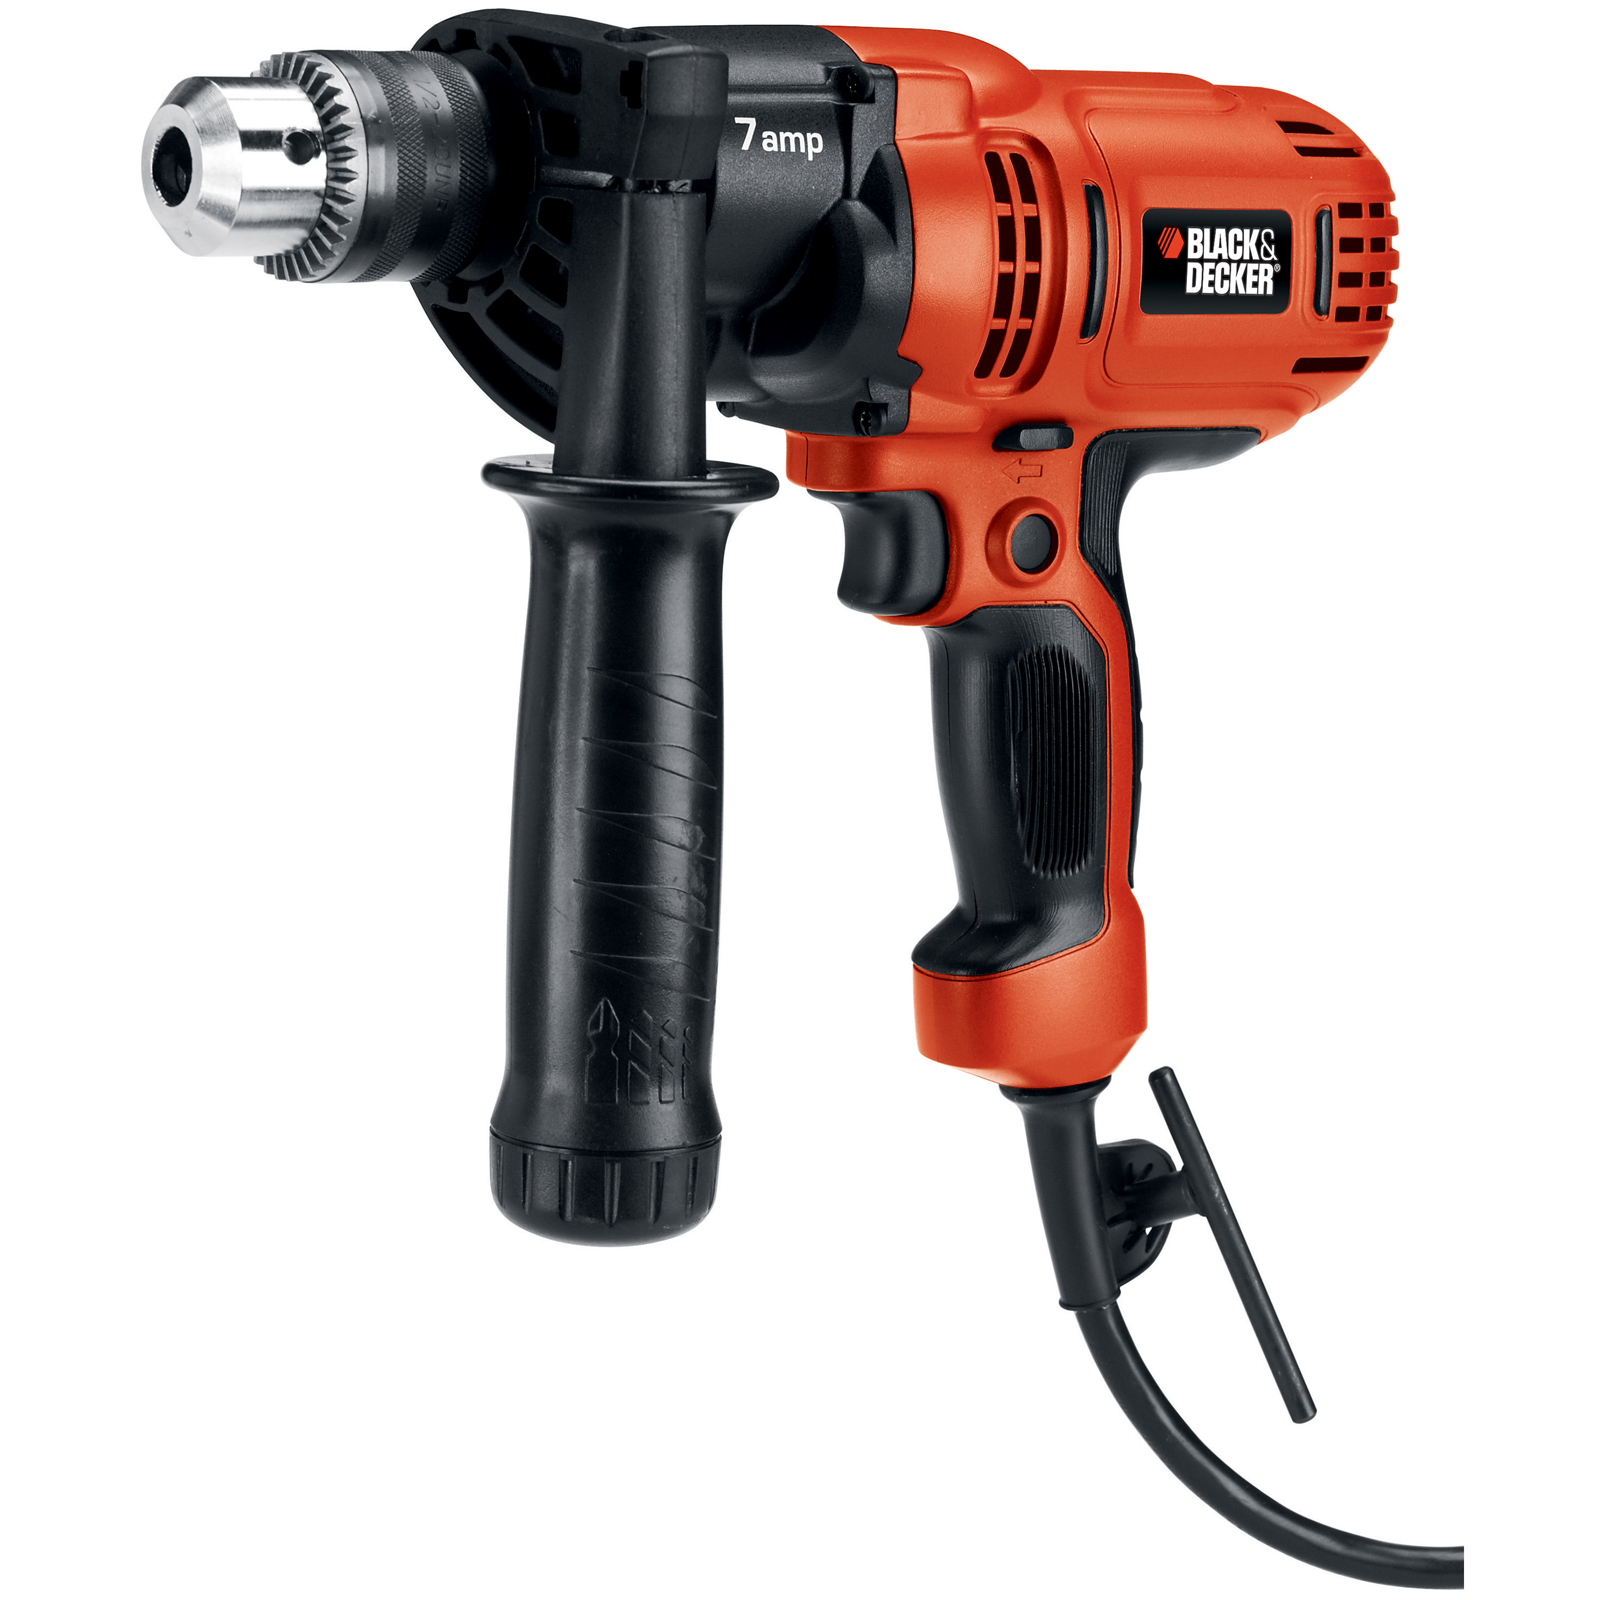 BLACK+DECKER DR560 Variable Speed Compact Drill/Driver, 1/2-Inch